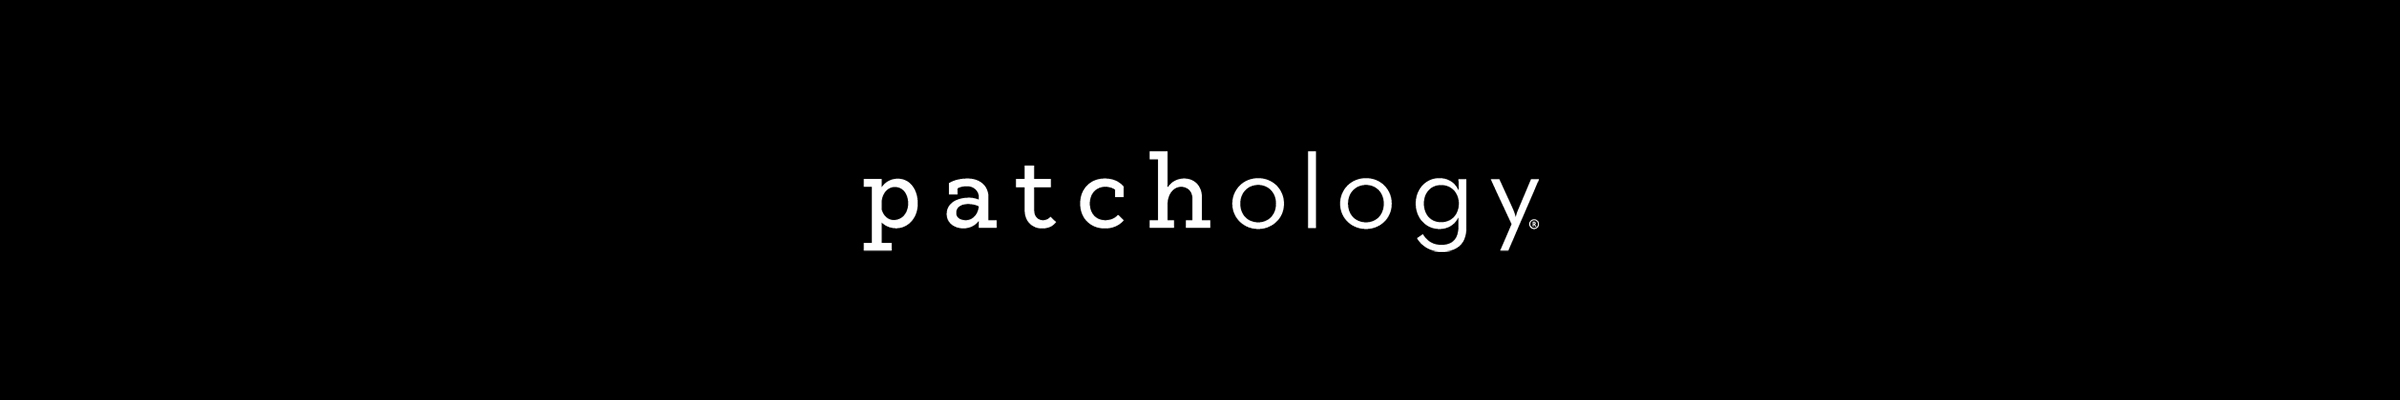 patchology-banner